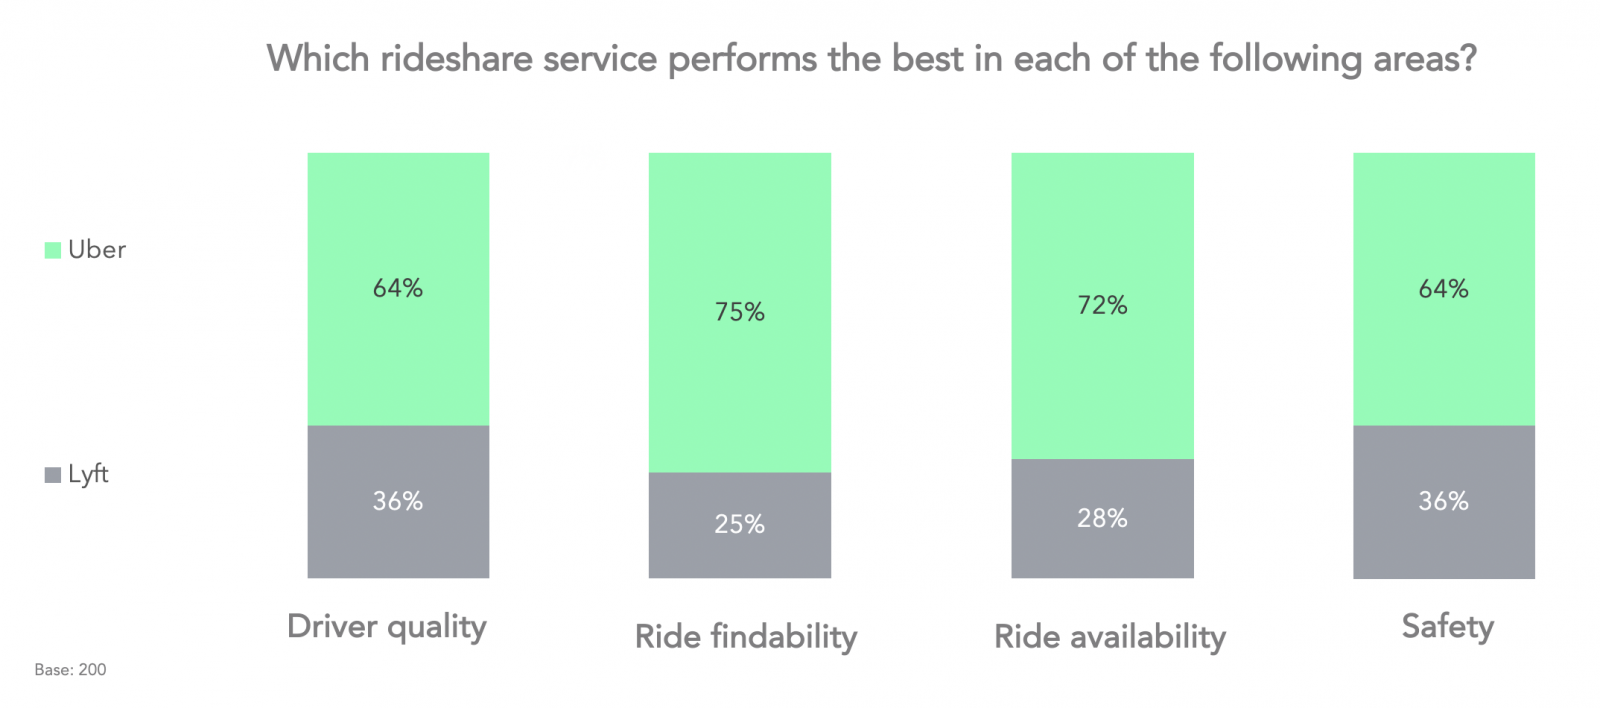 Which rideshare service performs the best in each of the following areas?